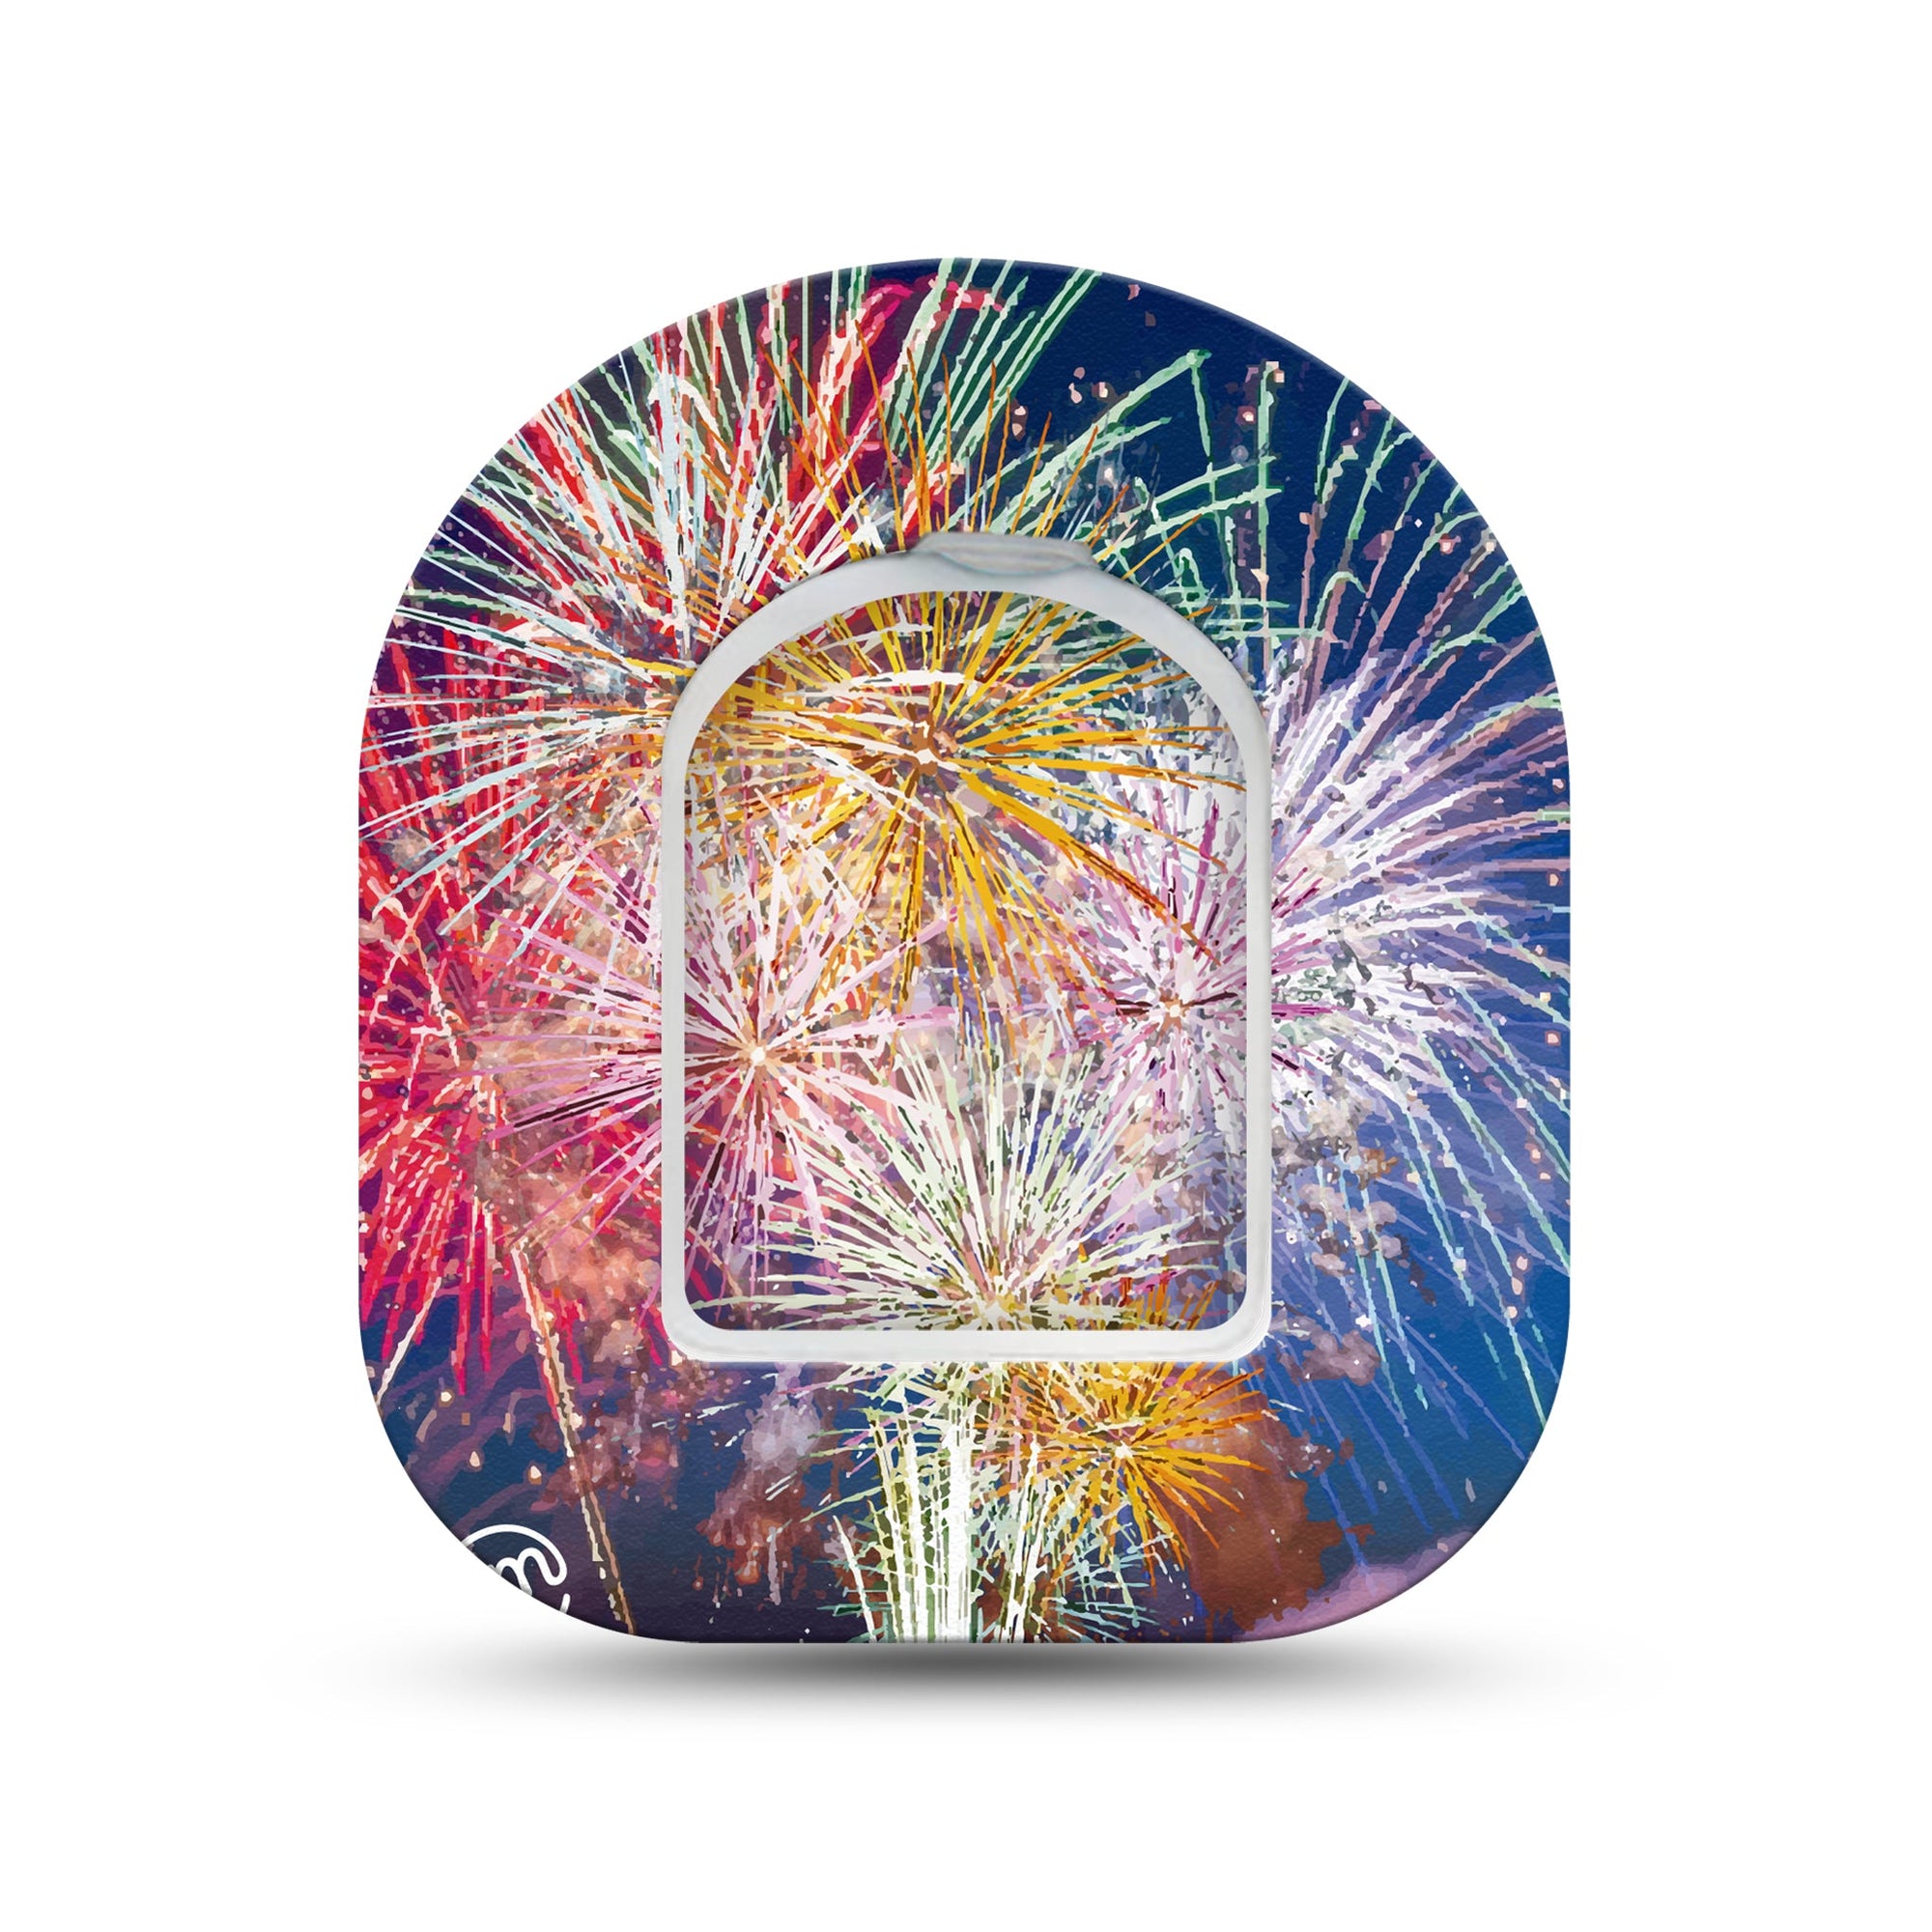 ExpressionMed Fireworks Pod Mini Tape Single Sticker and Single Tape, Colorful Sparks Patch Pump Design